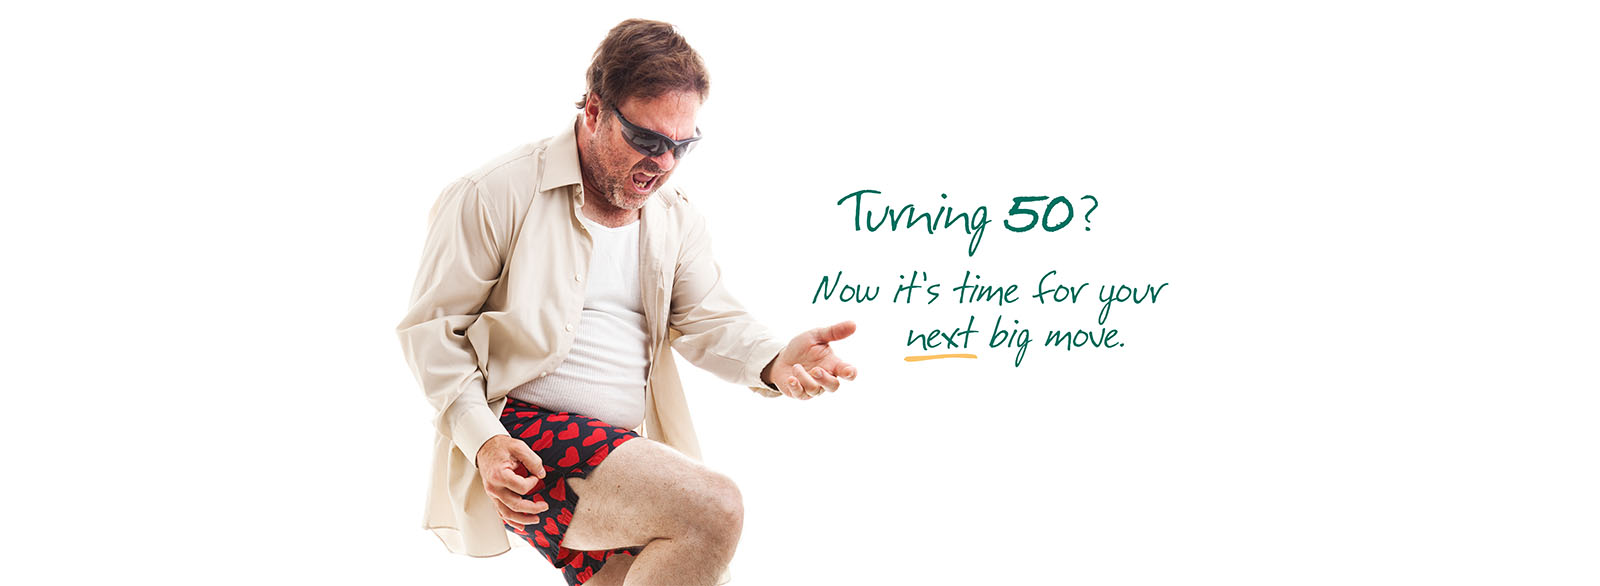 Middle-aged man in boxer shorts playing air guitar